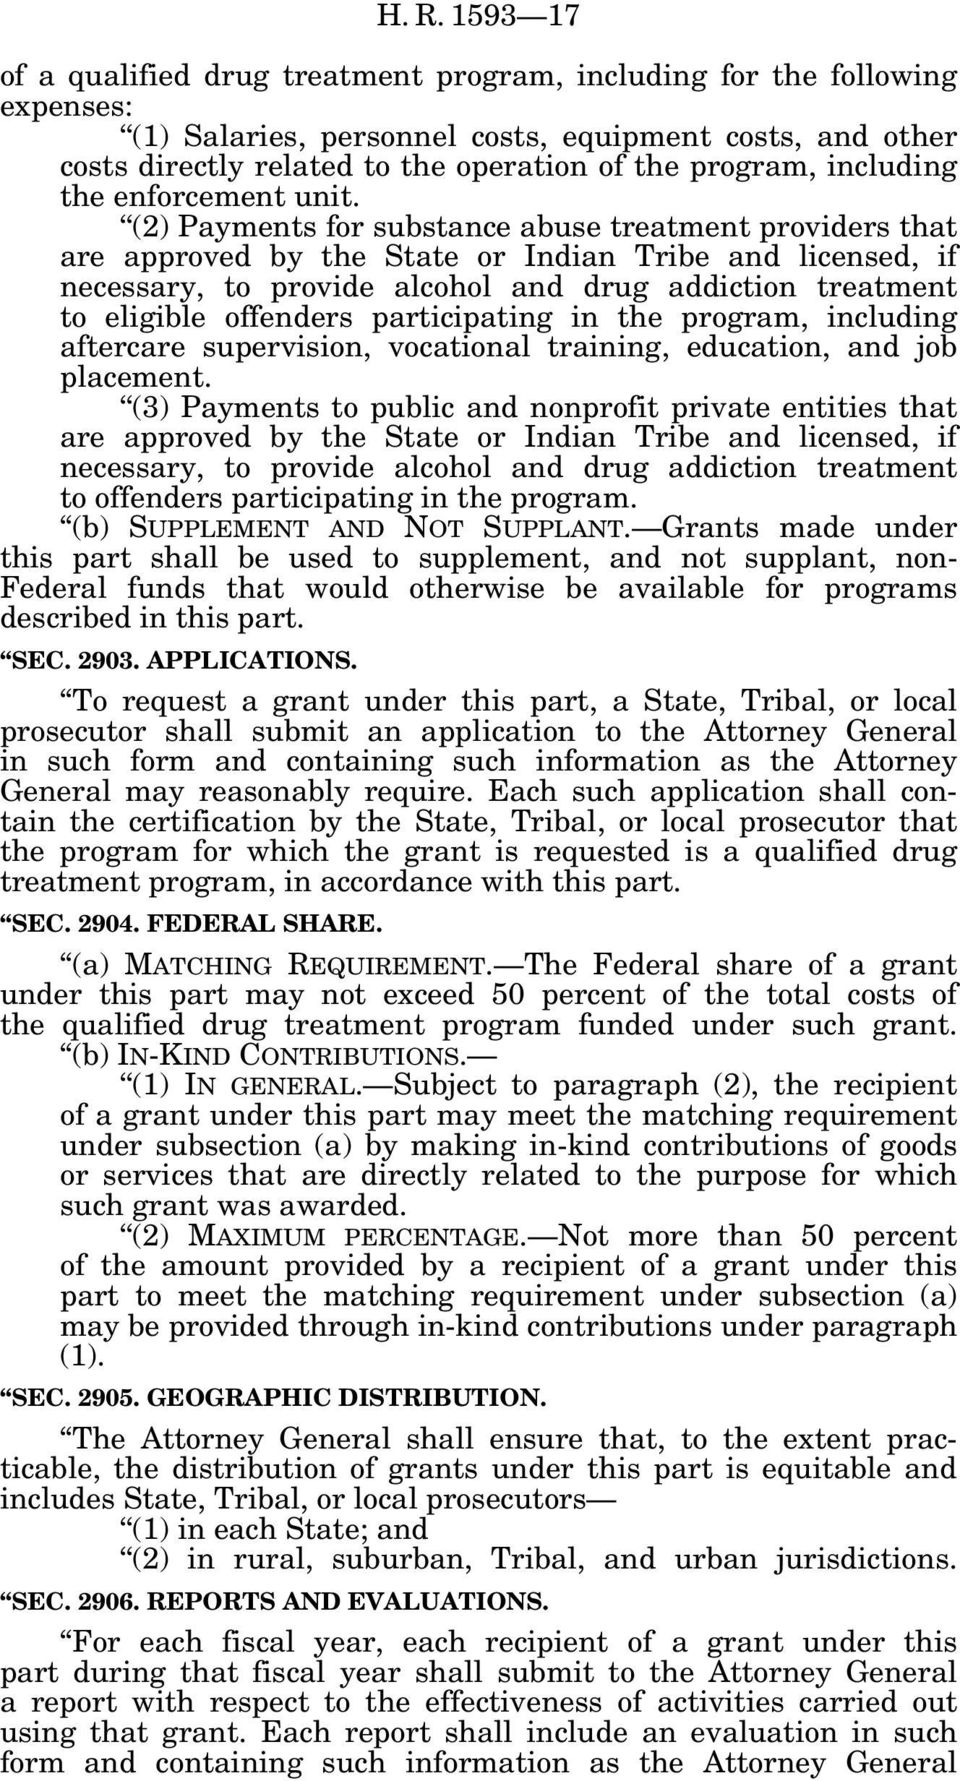 (2) Payments for substance abuse treatment providers that are approved by the State or Indian Tribe and licensed, if necessary, to provide alcohol and drug addiction treatment to eligible offenders